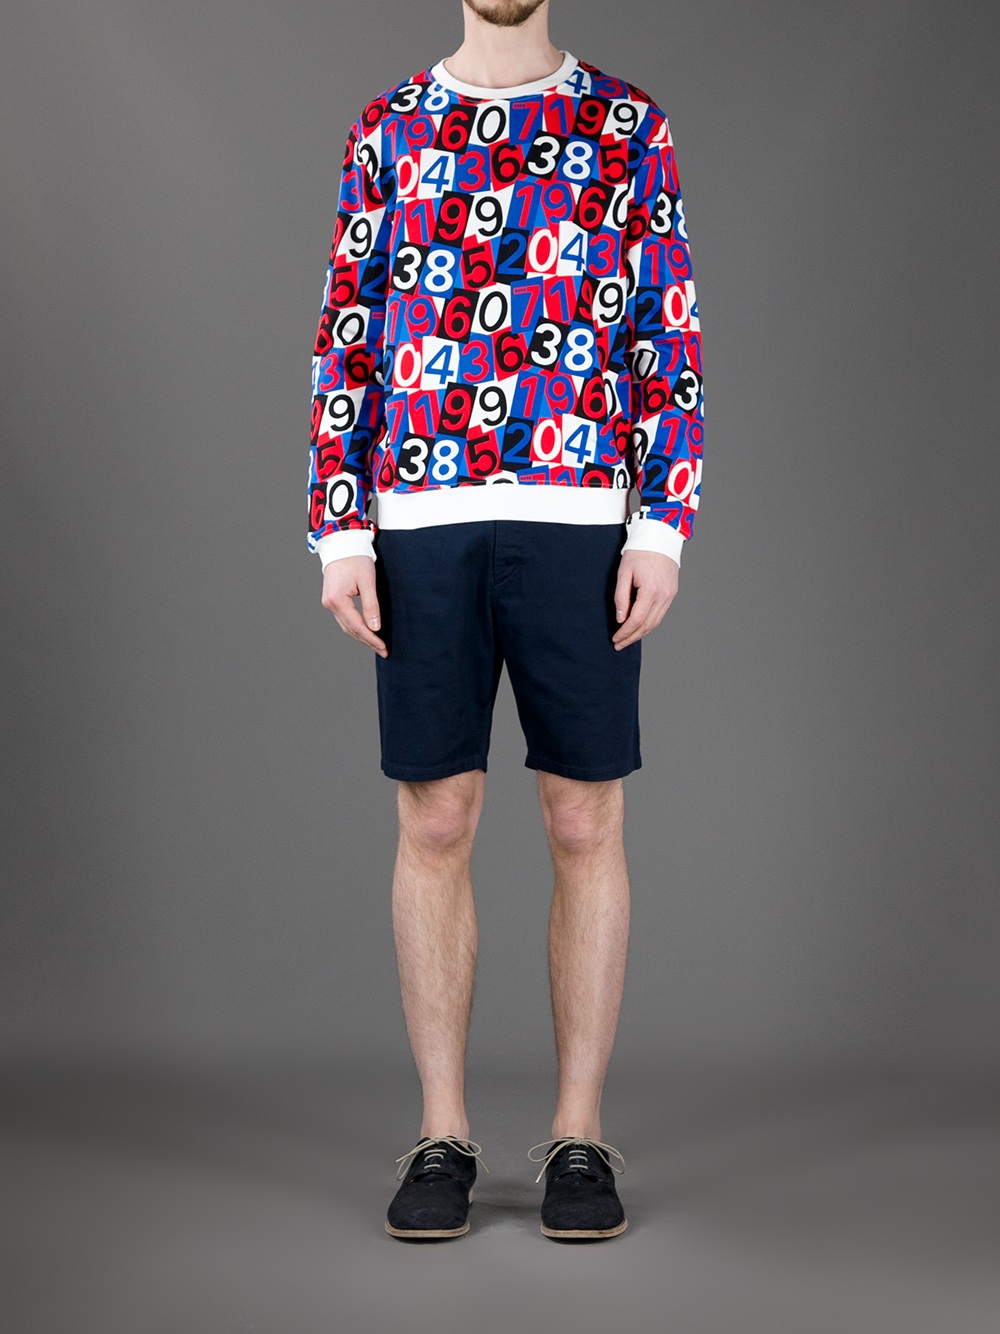 Lyst - Msgm Printed Sweat Shirt in Blue for Men